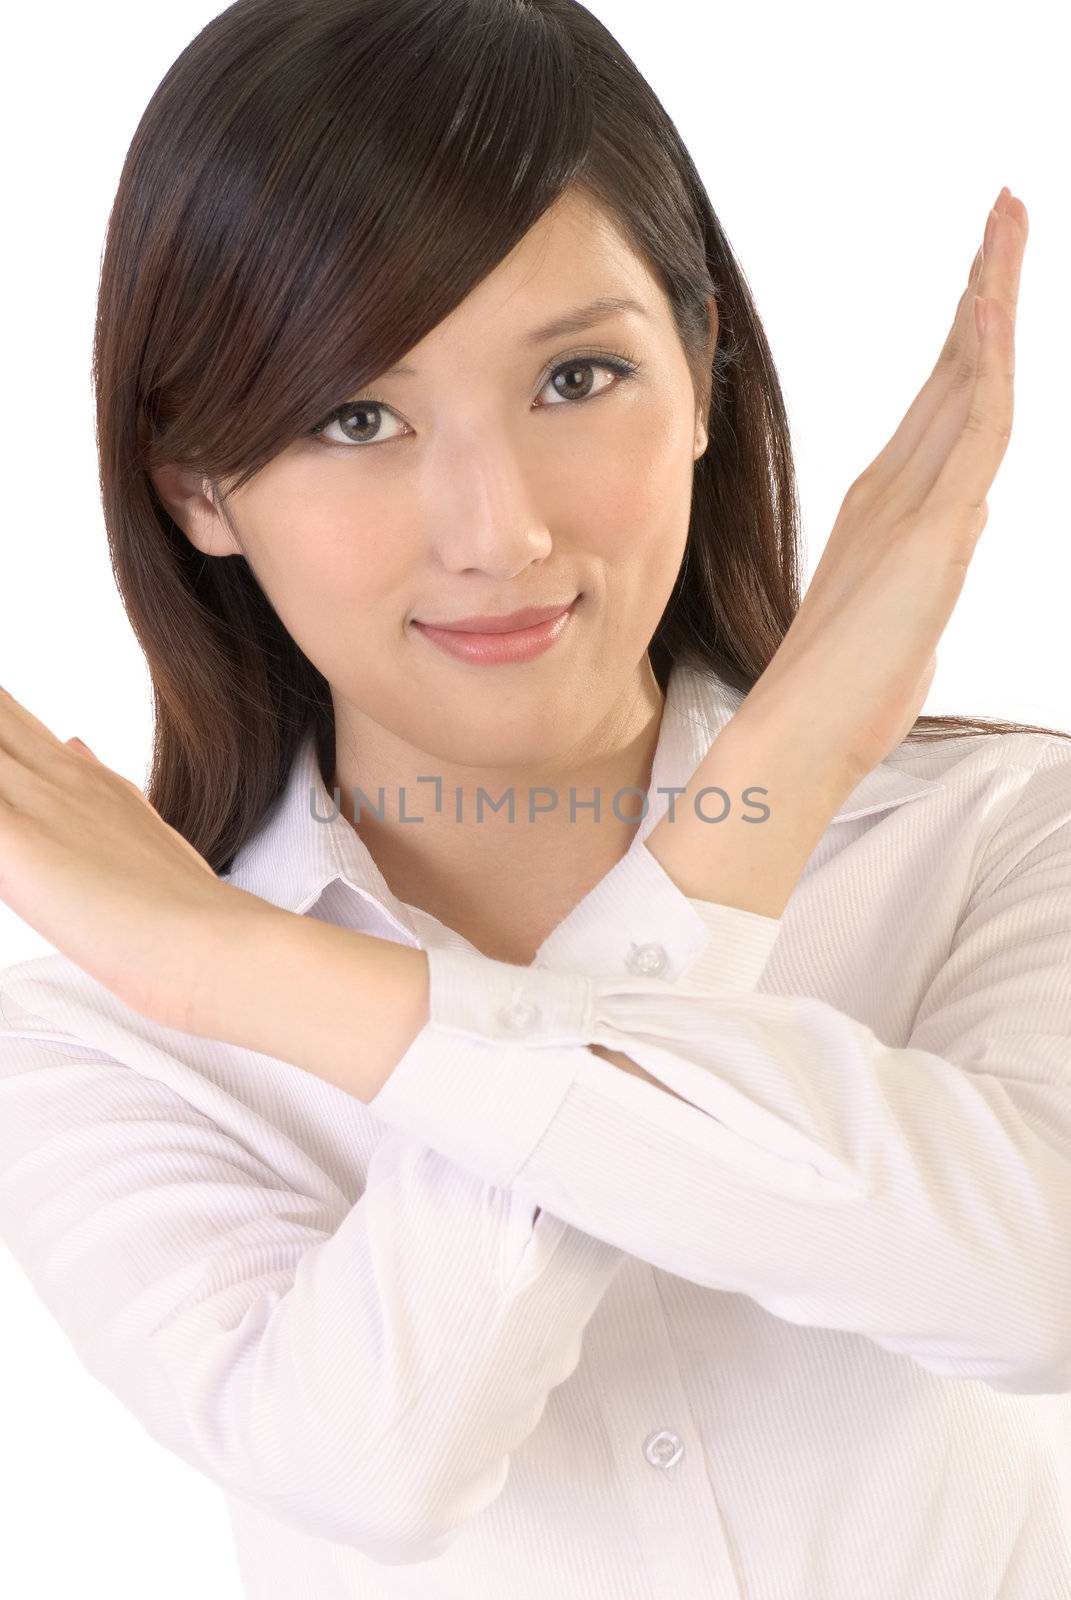 No gesture of Asian business woman on white background.